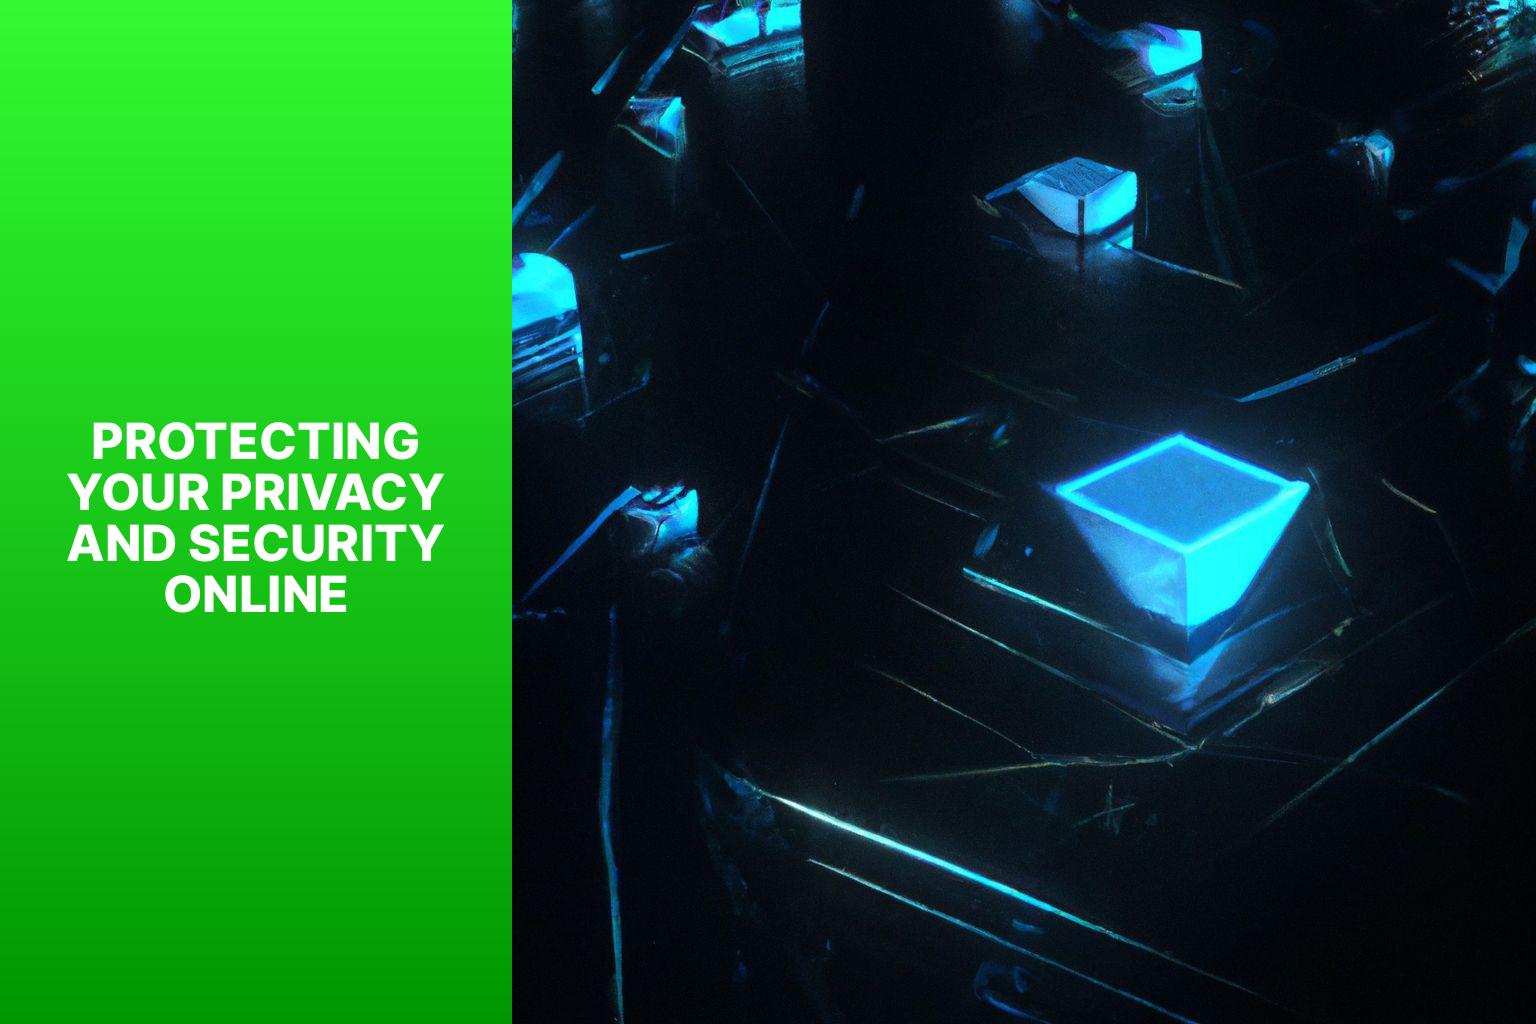 Protecting Your Privacy and Security Online - Best Practices for Managing Your Online Presence 